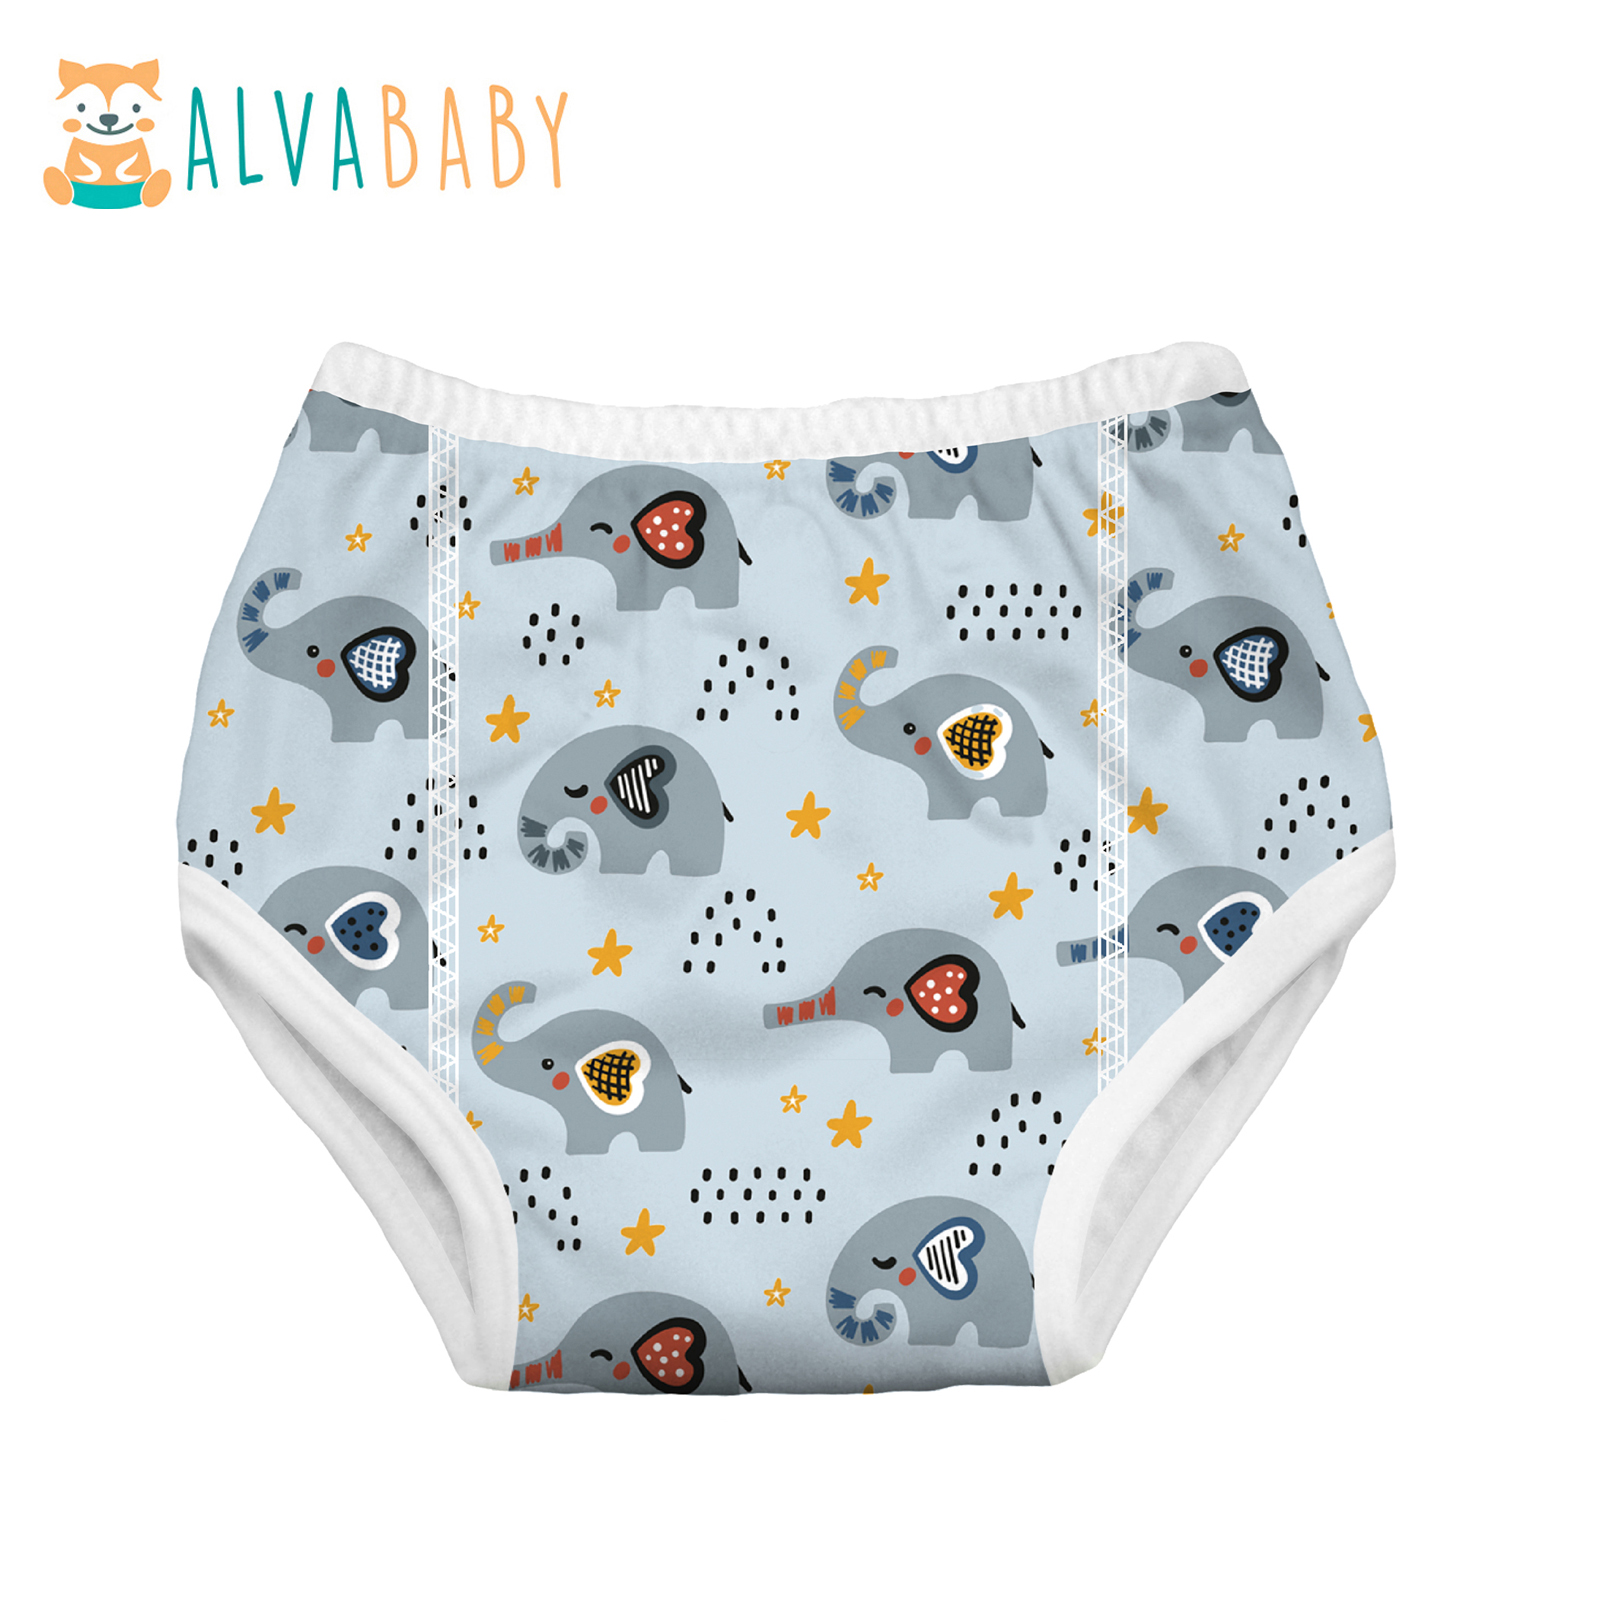 ALVABABY Cotton Training Pant Toddler Training Pant Training Underwear for Potty  Training-Lemon(XC-BS22A)